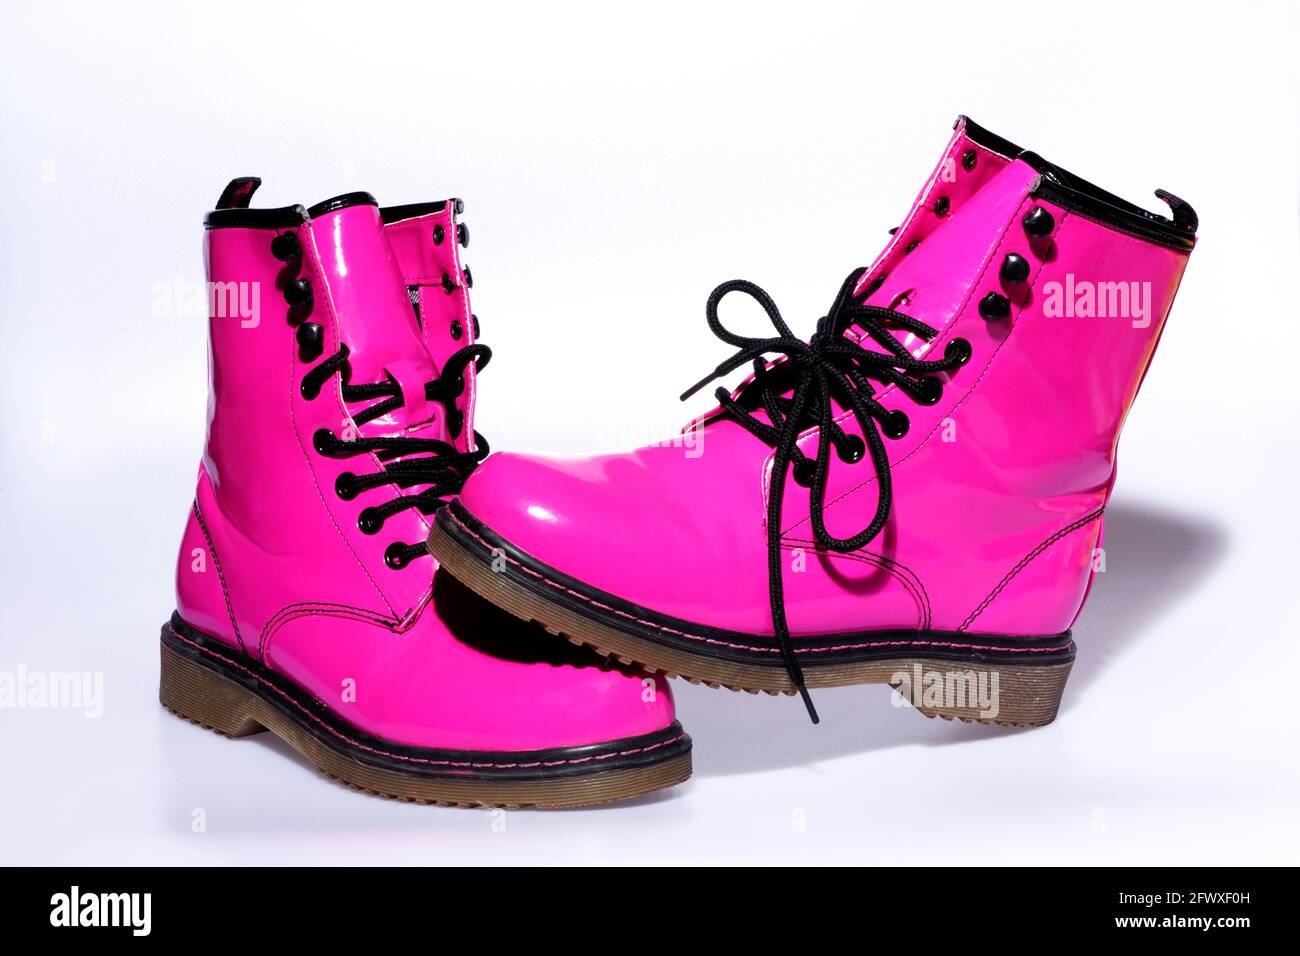 Dr, Martens, shoes, United, Kingdom, footwear, fashionable, fashion,  lifestyle, contemporary, typical, individuality, individual, display,  commerce Stock Photo - Alamy